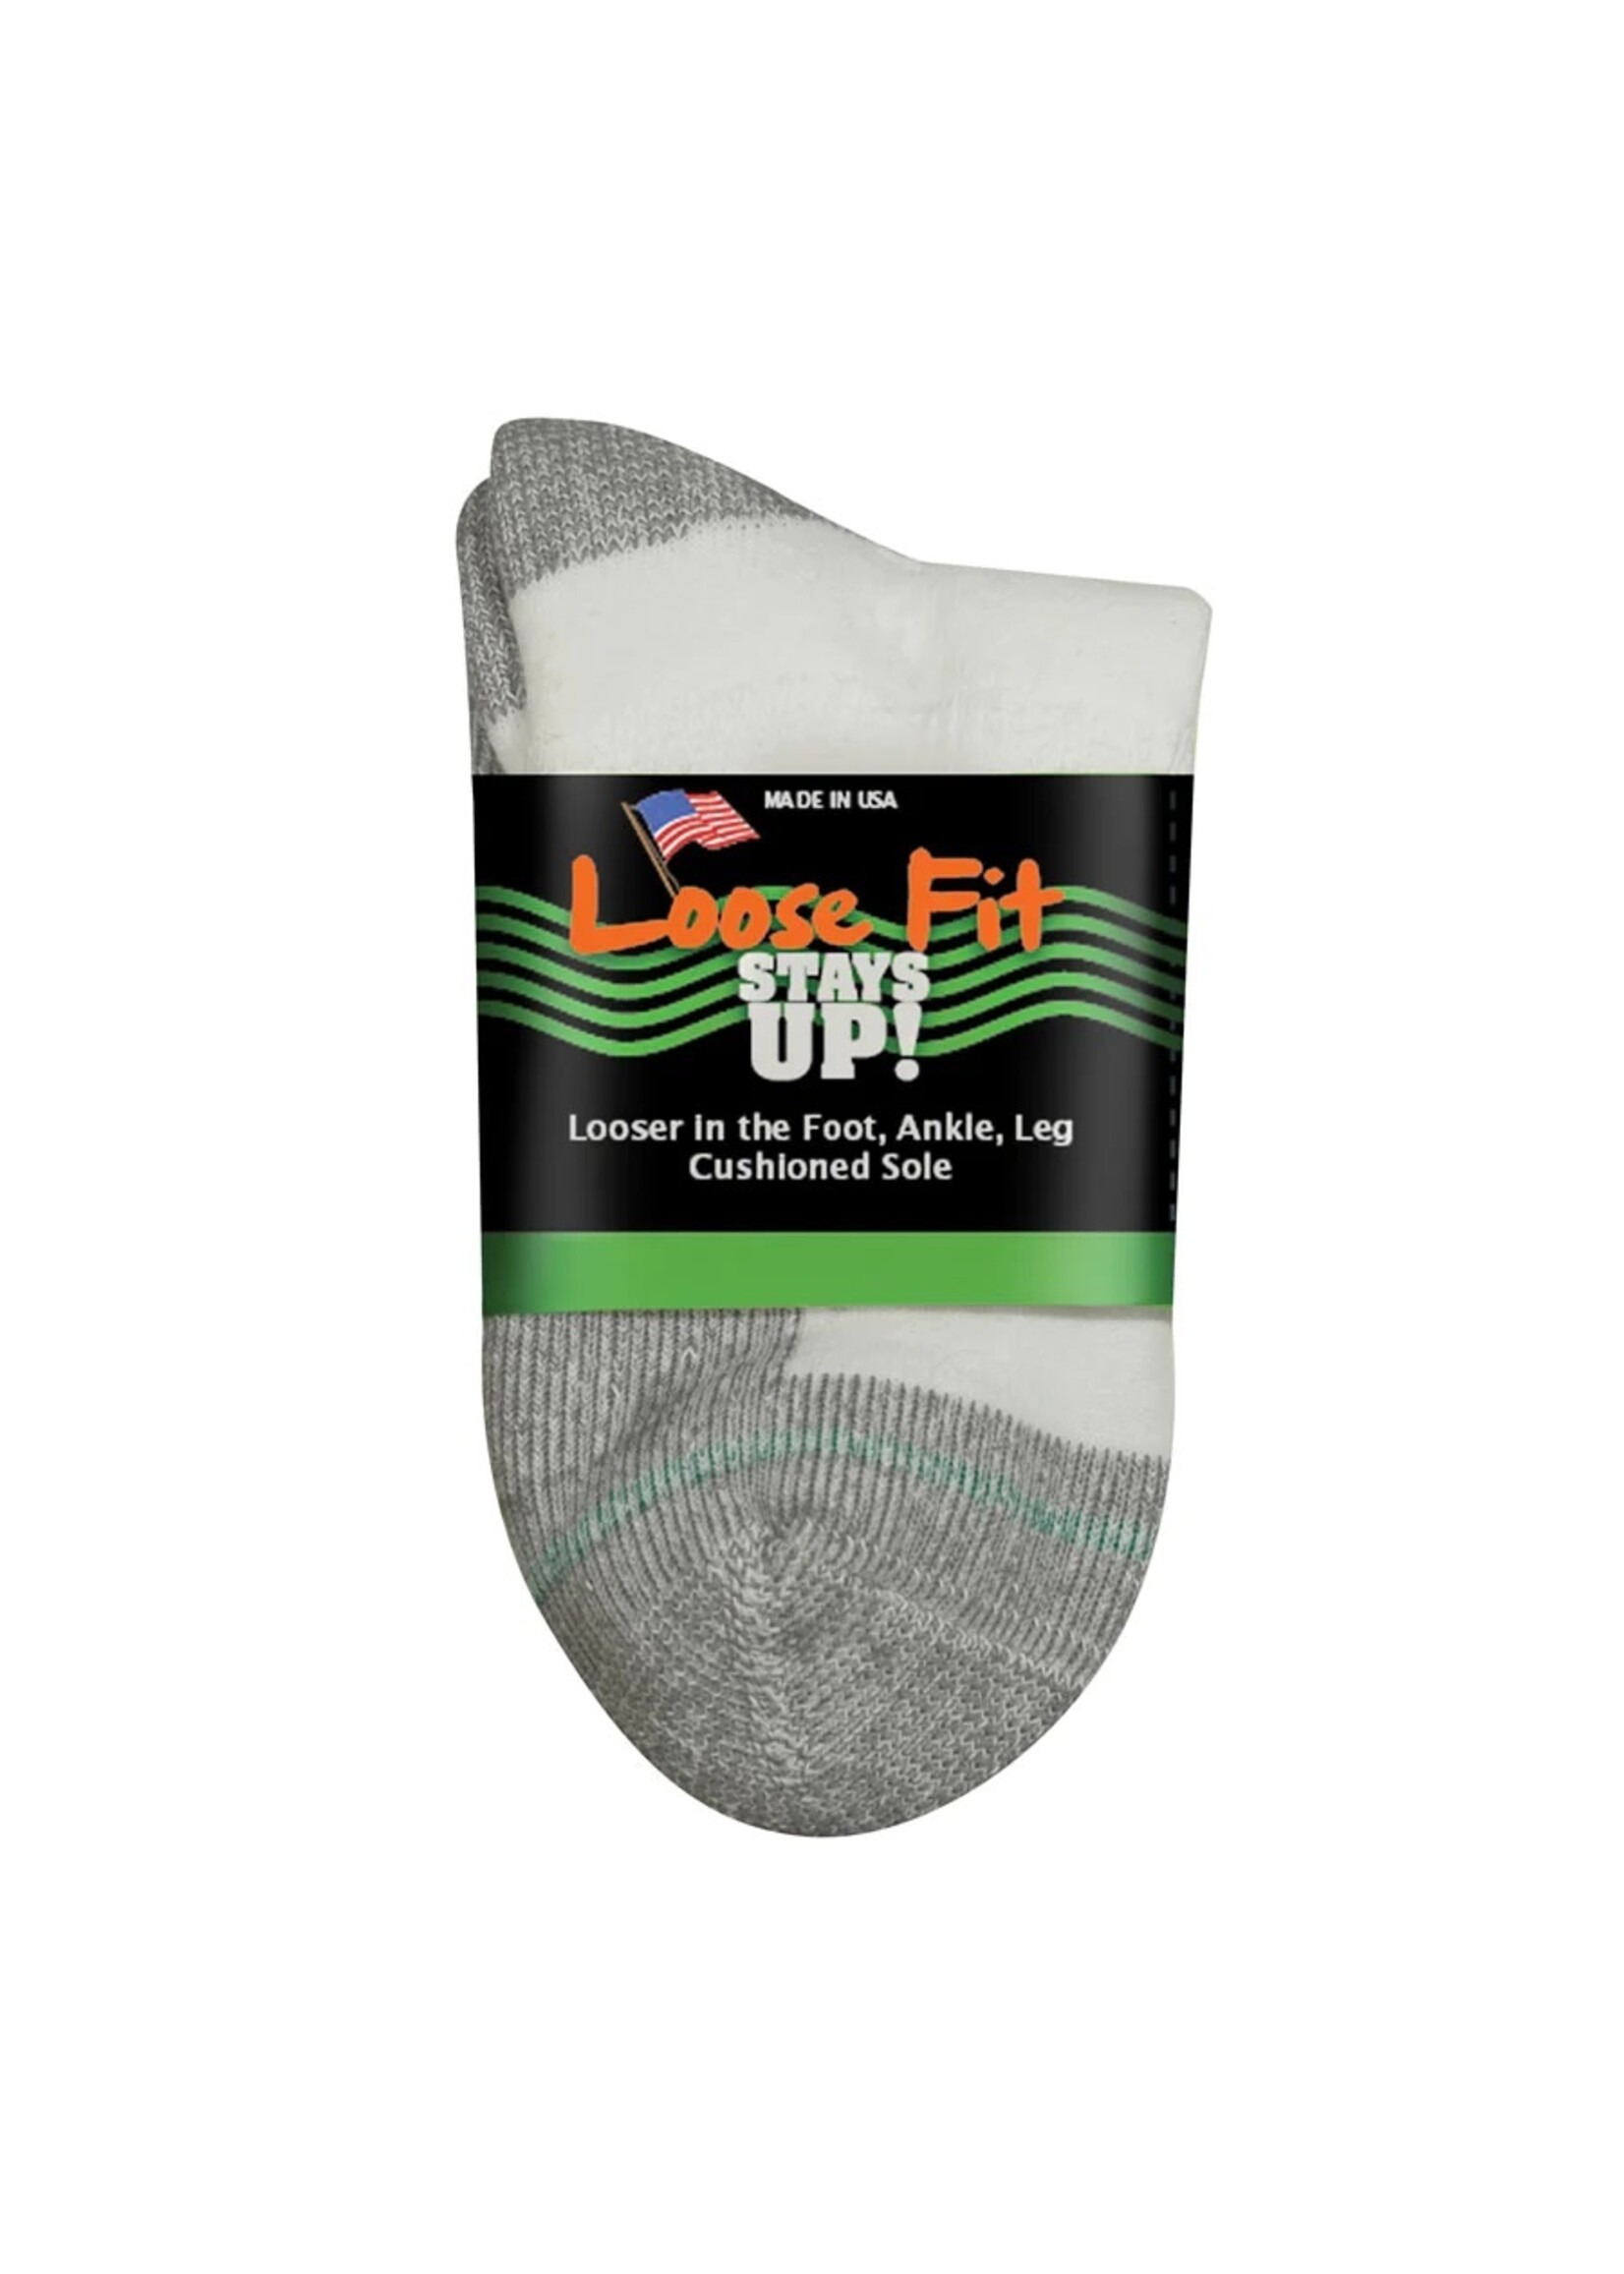 Extra Wide Sock Company Loose Fit Stays Up Small Crew Sock White #770